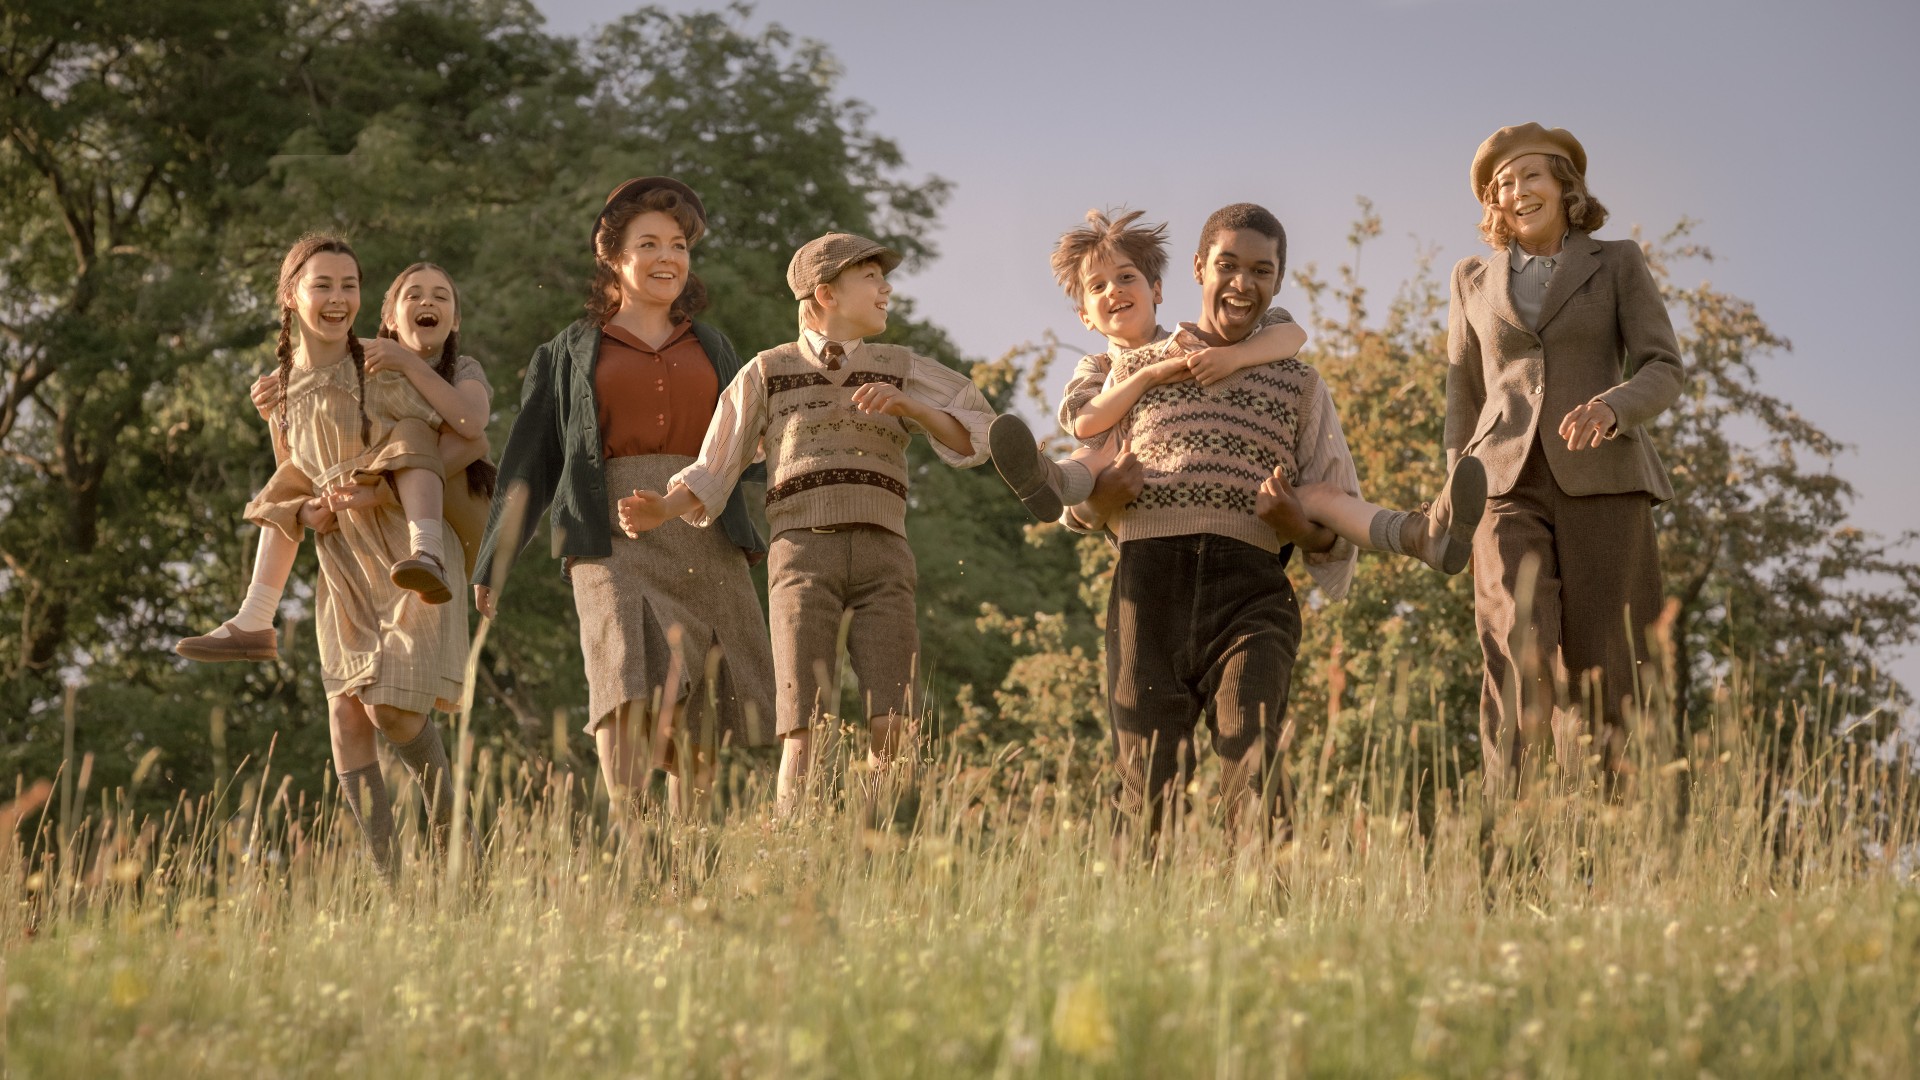 WATCH: Jenny Agutter Reprises Iconic Role in First Trailer for ‘The Railway Children Return’